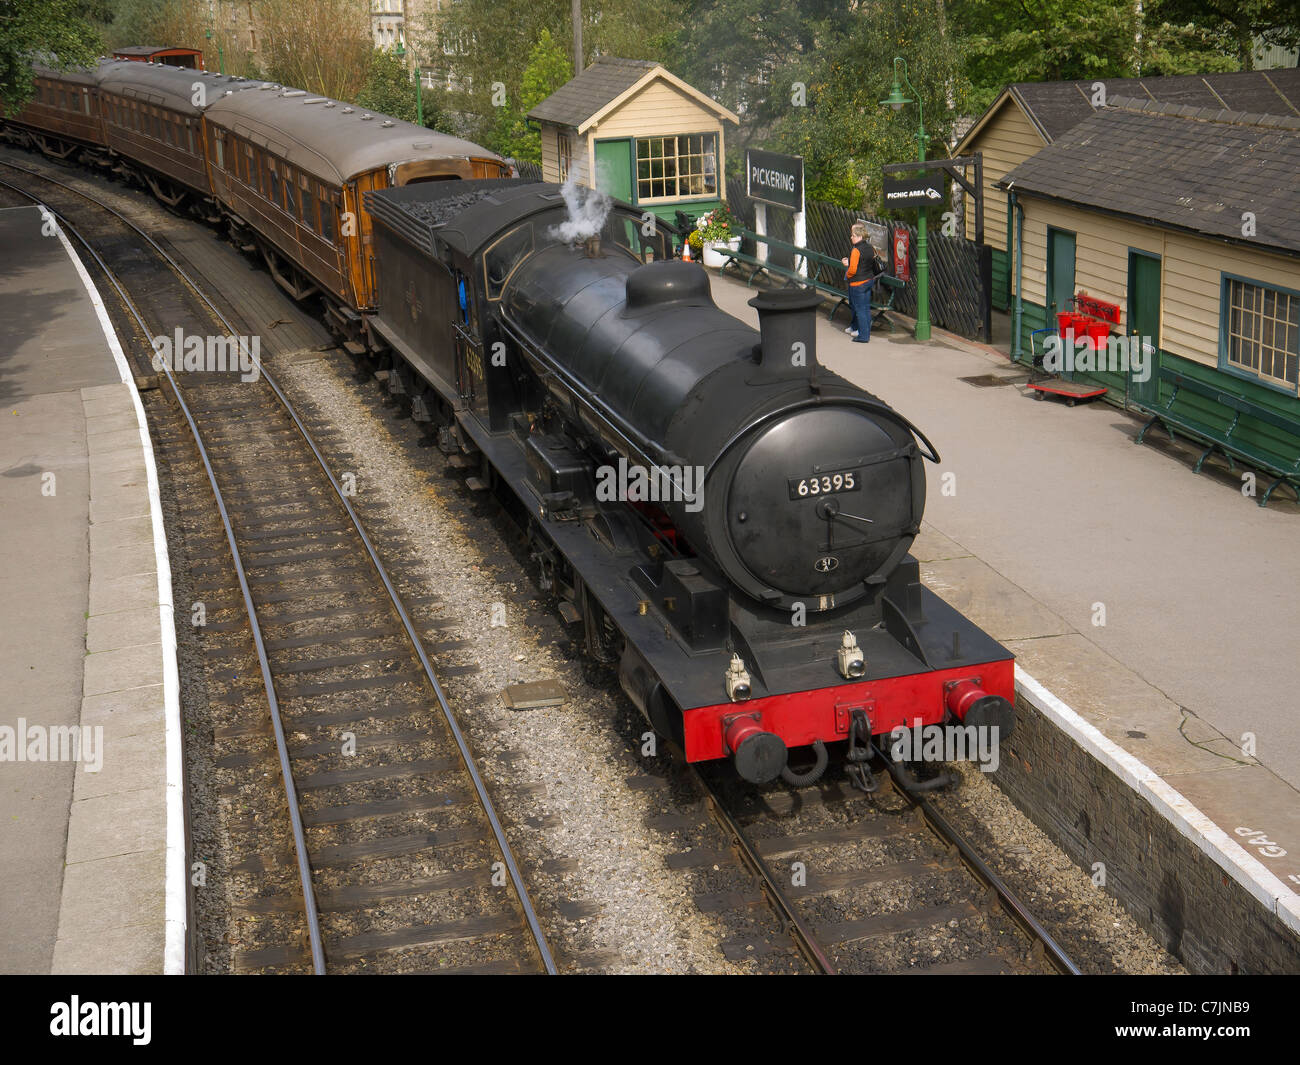 A train of ex LNER teak coaches arriving at the North Yorkshire Moors Railway Pickering station hauled by a Q6 class steam loco Stock Photo